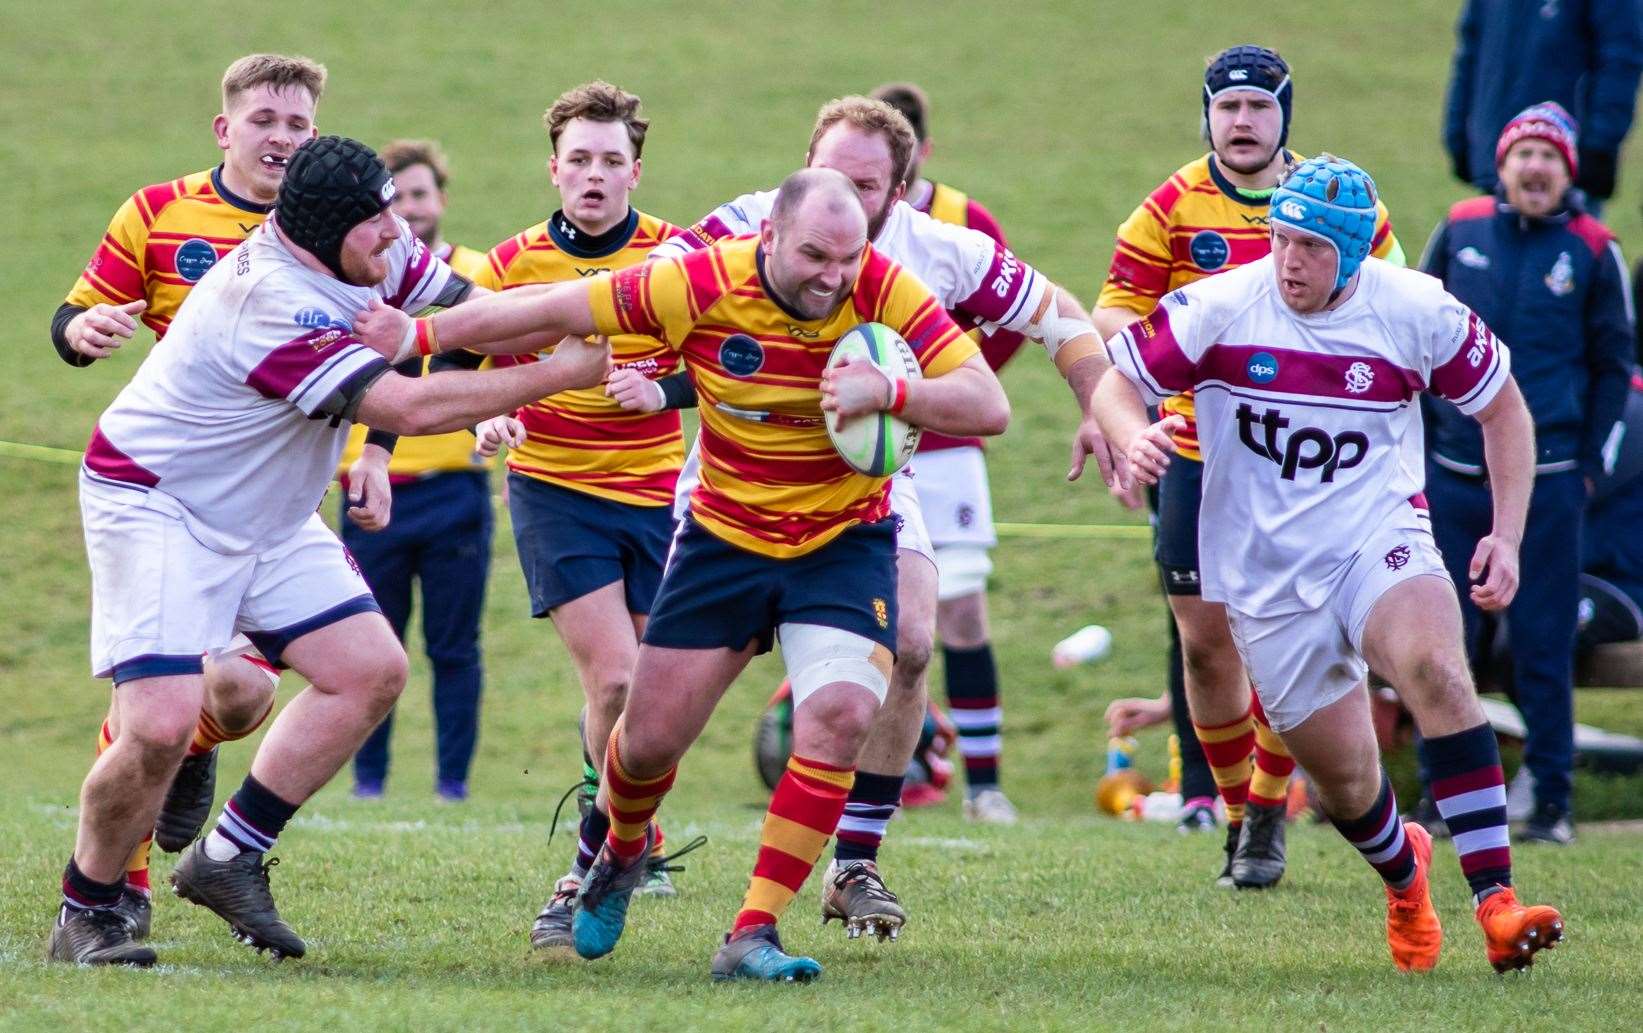 Medway captain Tom Beaumont pushes ahead against Sidcup with Harry Campbell, Will Purdy and Dan Jackson in support. Picture: Jake Miles Sports Photography